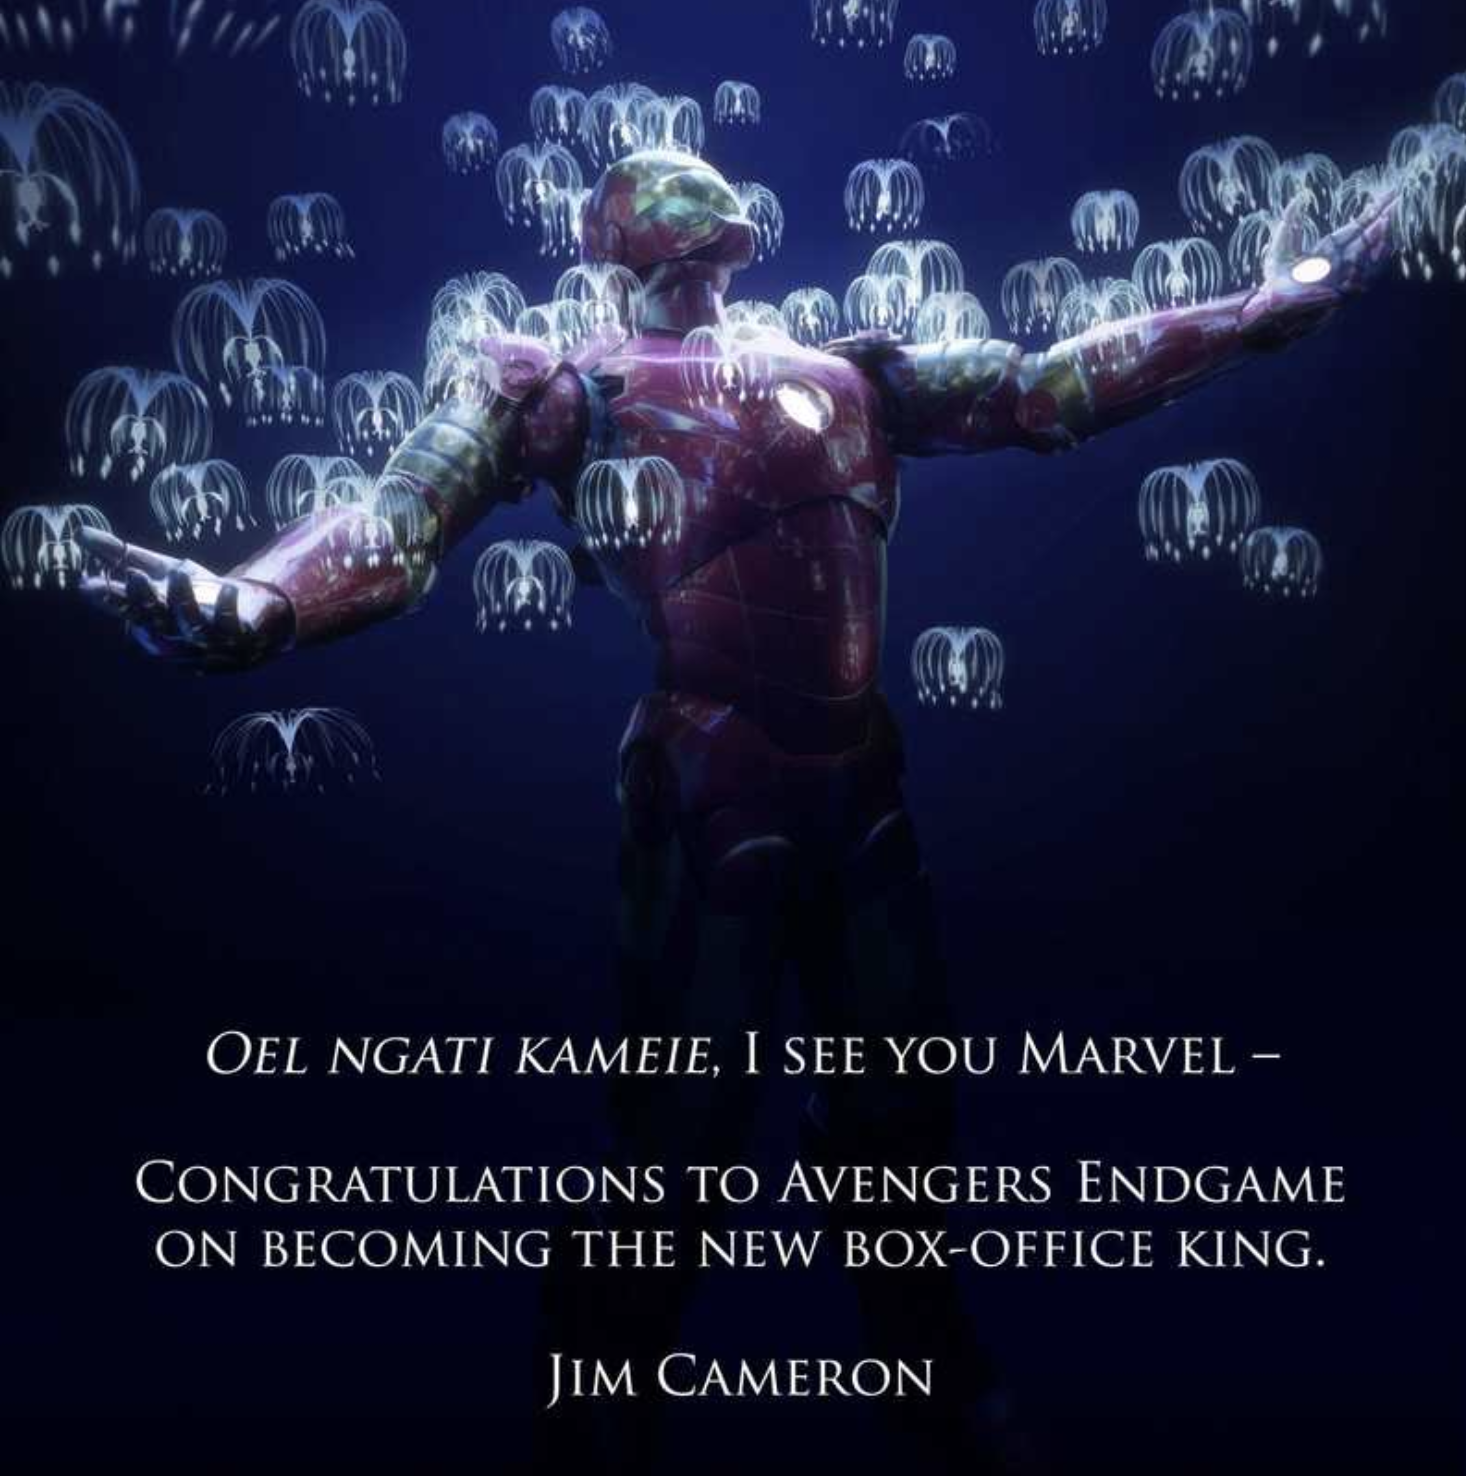 James Cameron congratulates Avengers: Endgame on becoming the highest-grossing movie of all time